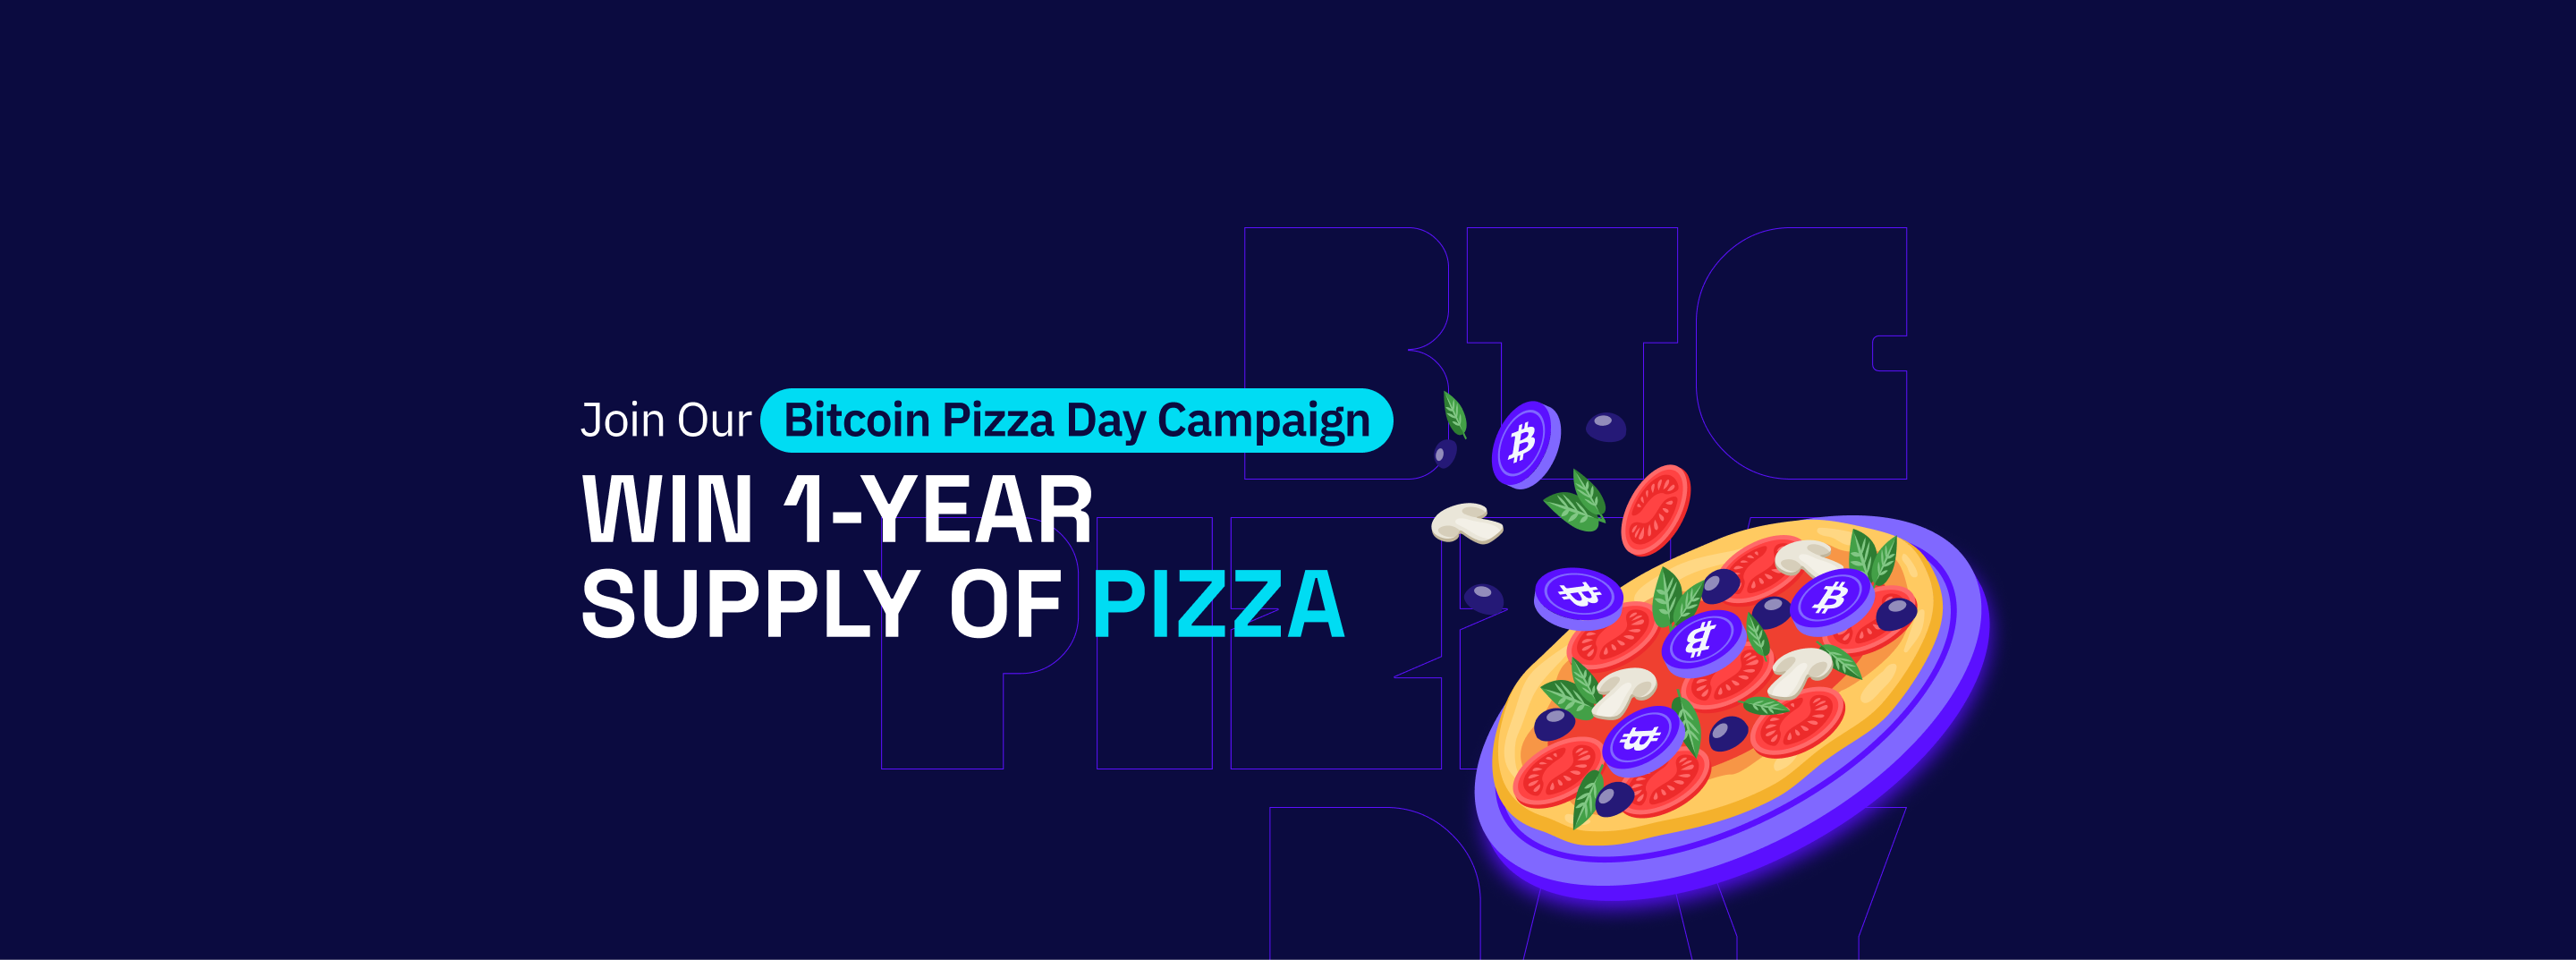 Join Our Bitcoin Pizza Day Campaign. Win 1-Year Supply of Pizza.